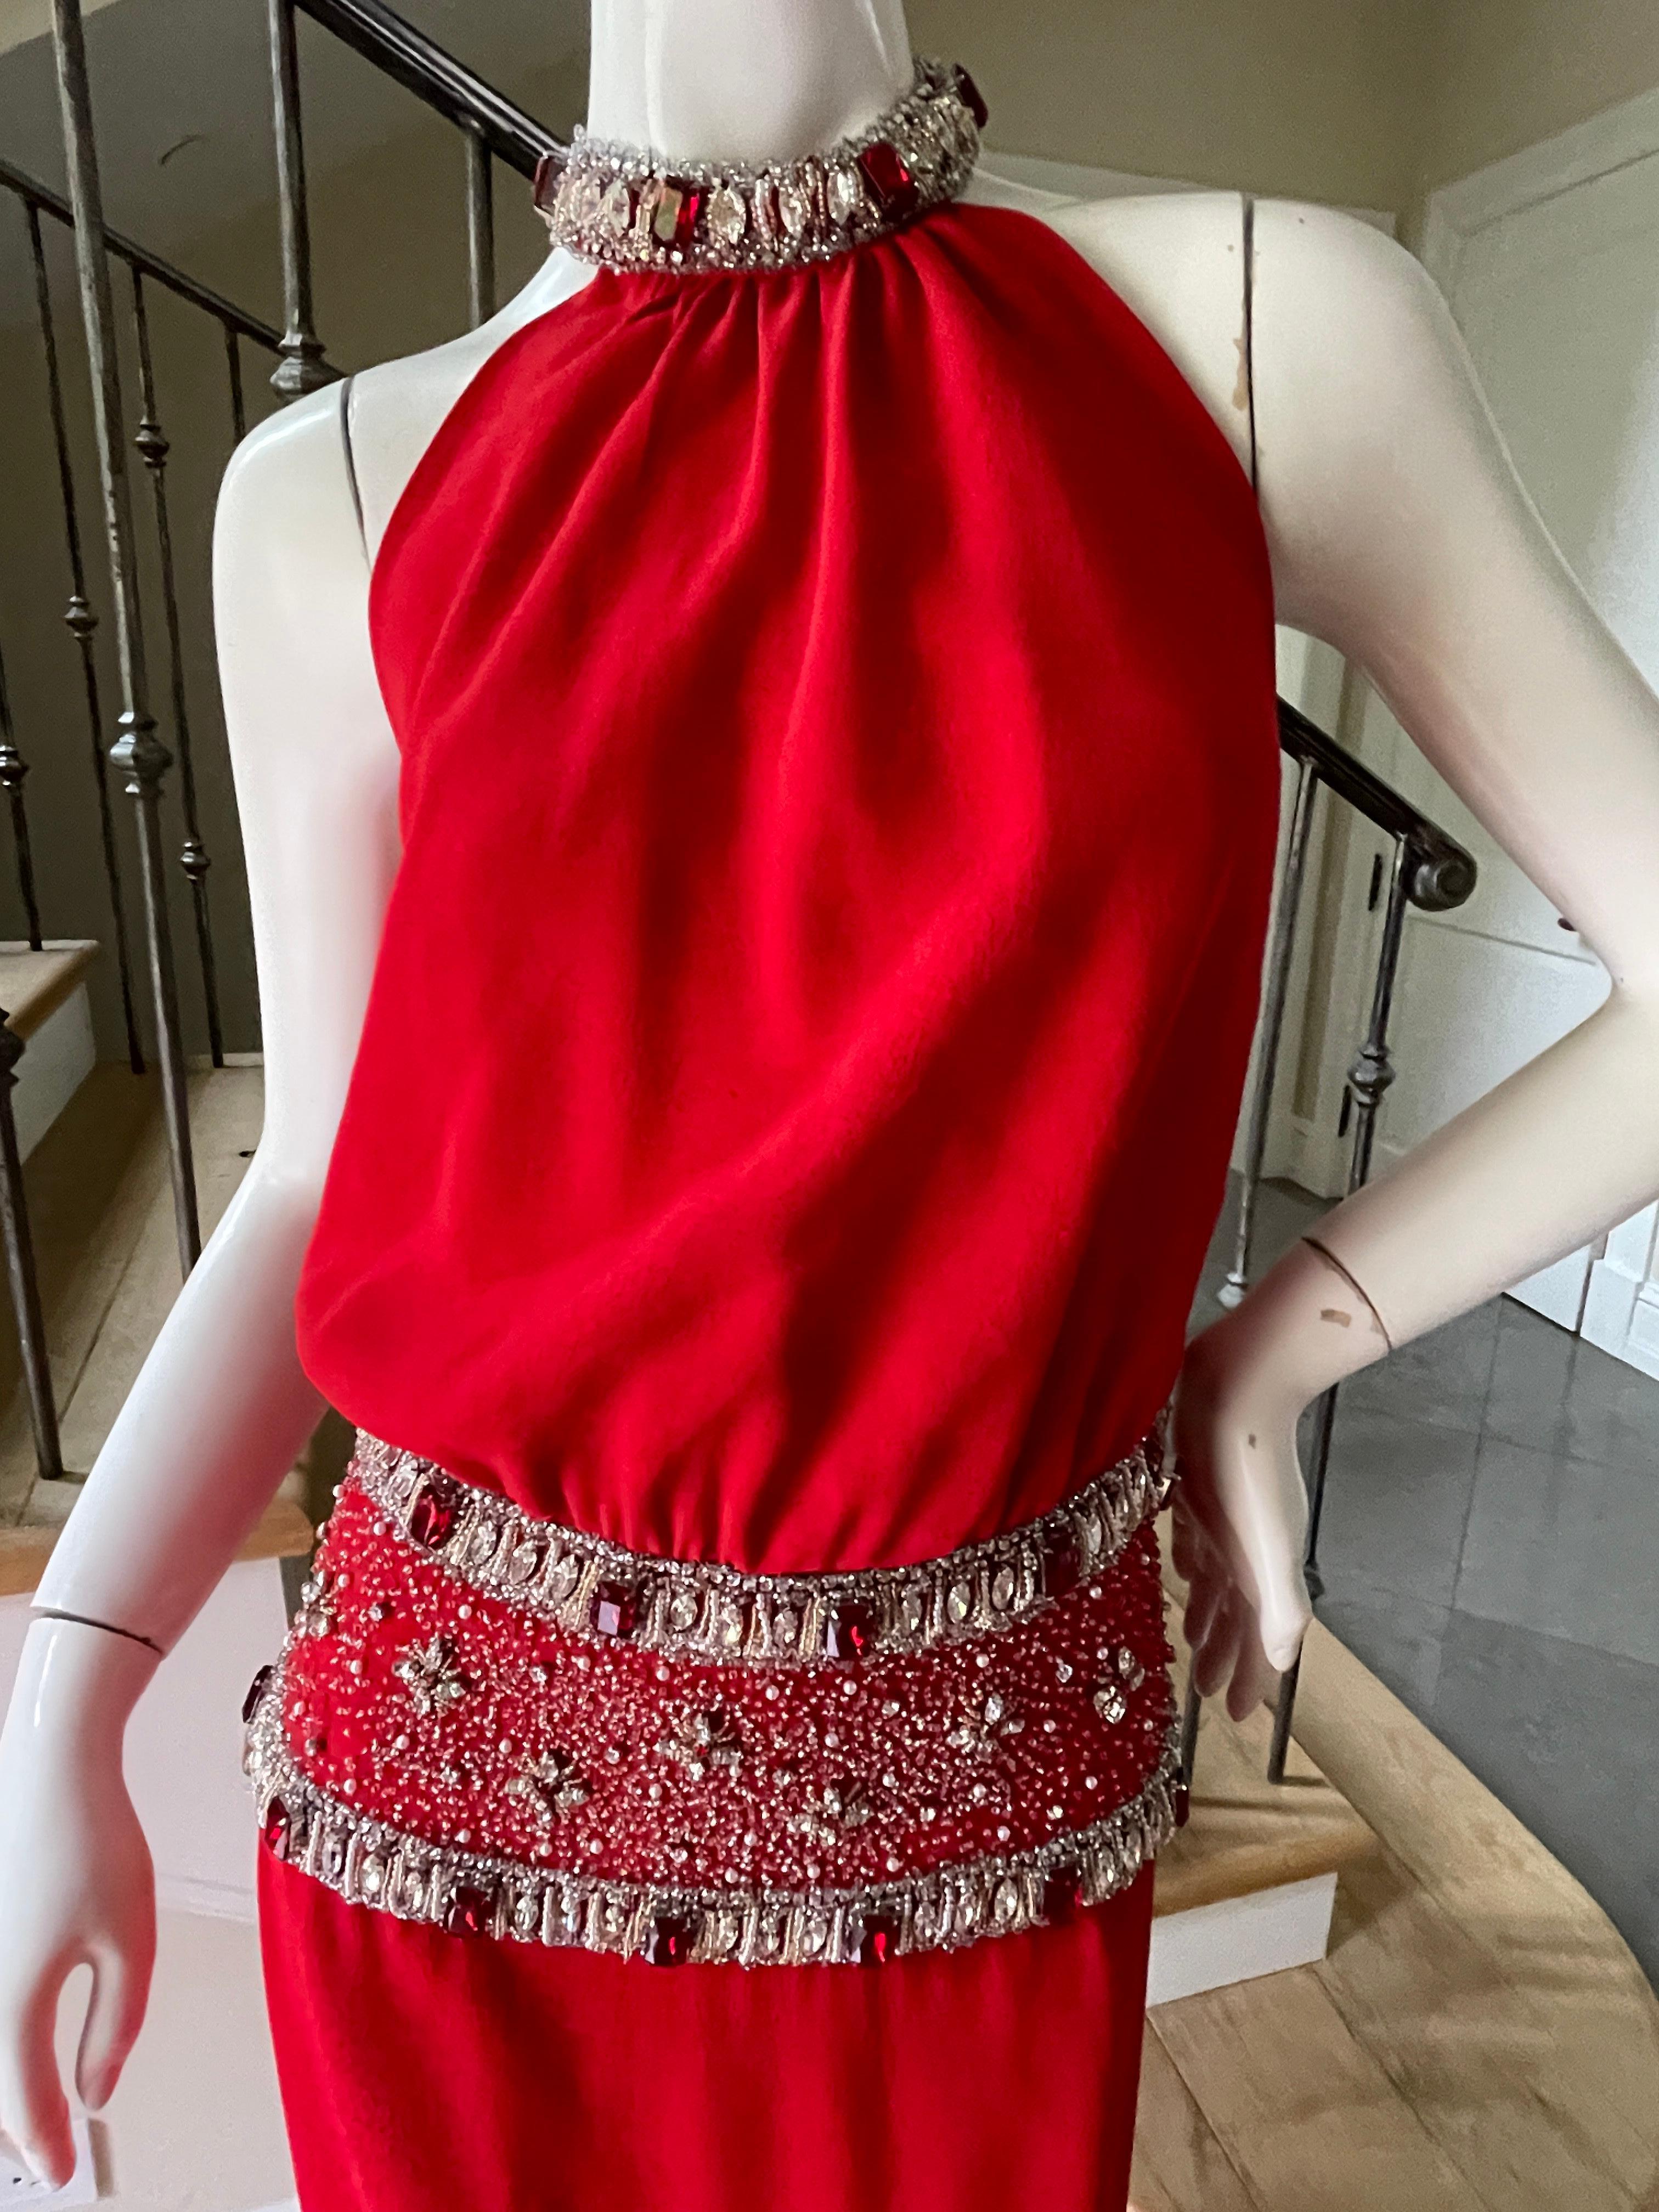 Carolyne Roehm Red Column Evening Dress with Jewel Embellished Waist and Collar  In Excellent Condition For Sale In Cloverdale, CA